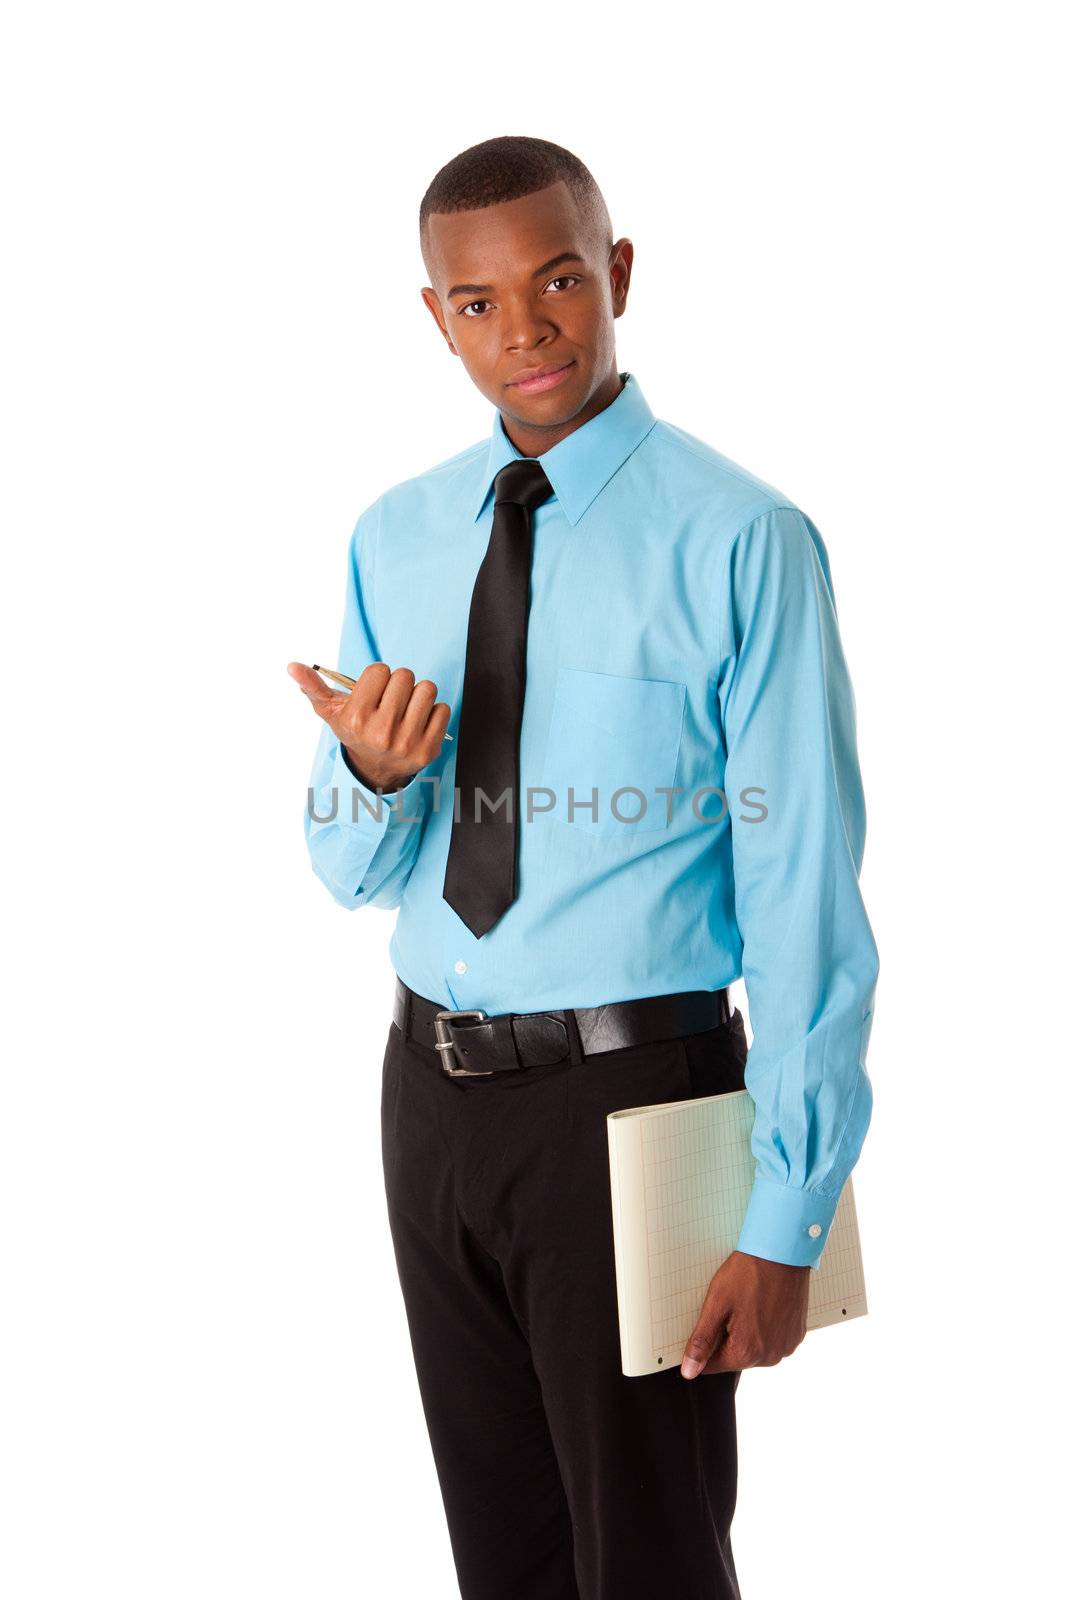 Handsome happy young male corporate MBA business student in blue shirt and black tie clicking pen holding notepad, isolated.